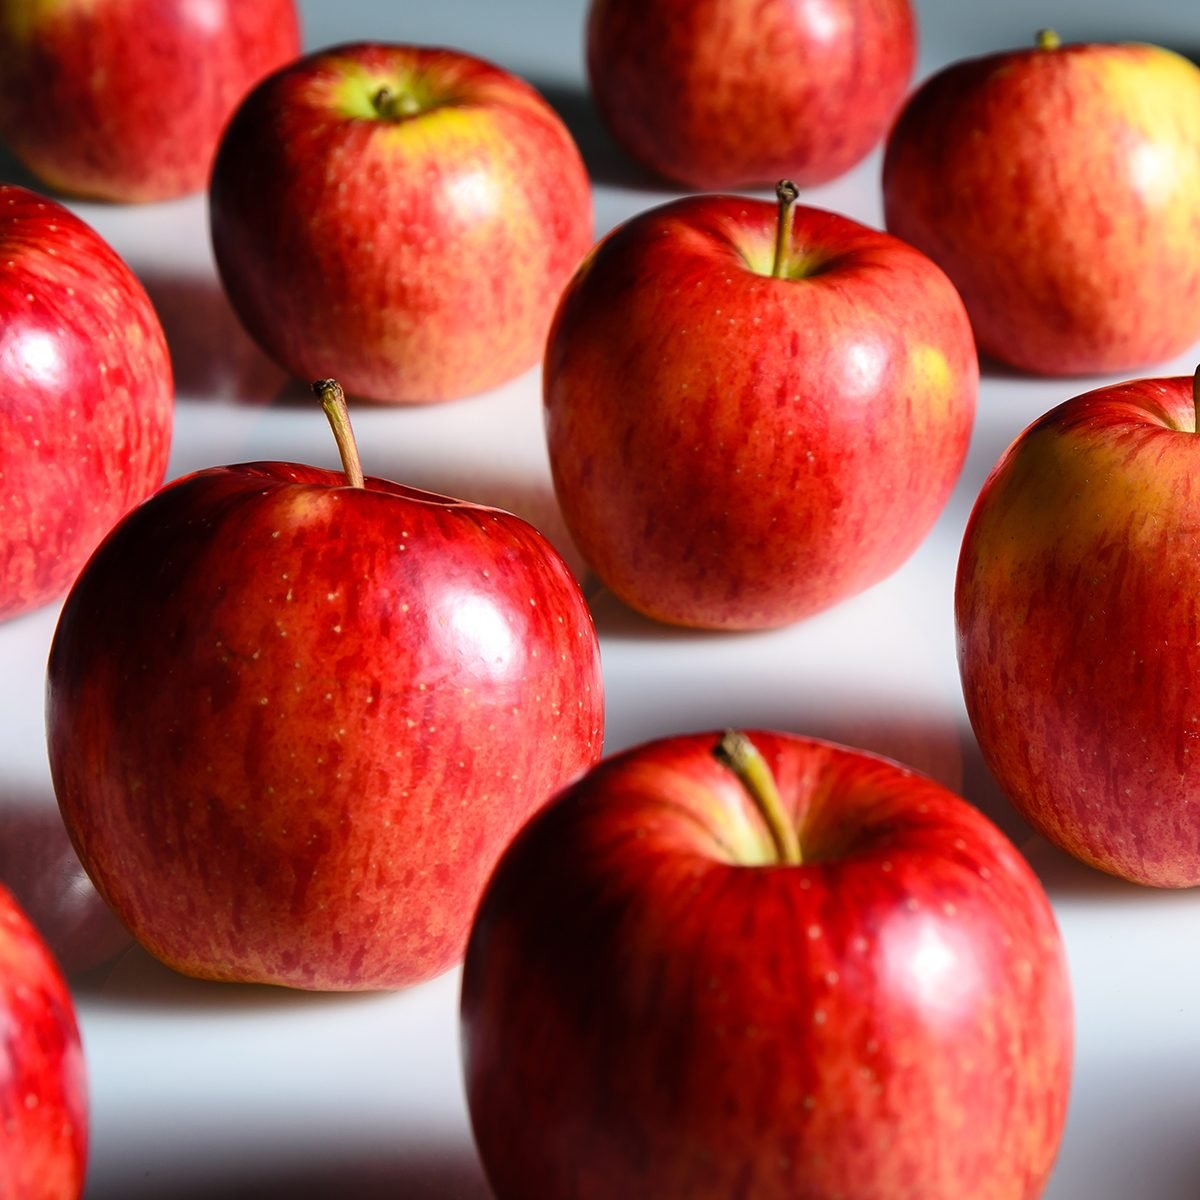 15 New Types of Apples You Should Be Buying